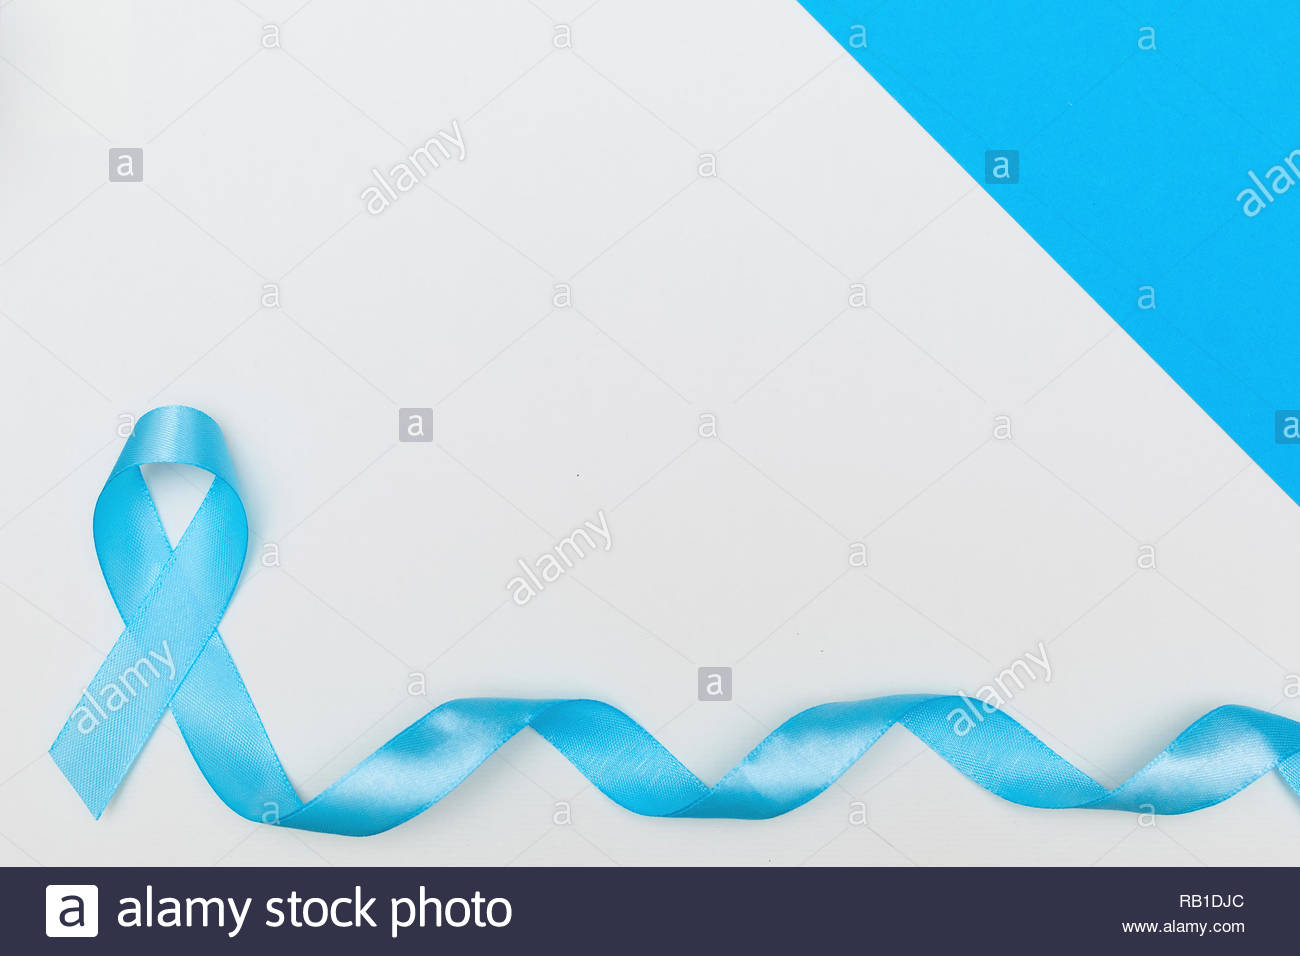 Blue Cancer Awareness Ribbon With Trail On White Background